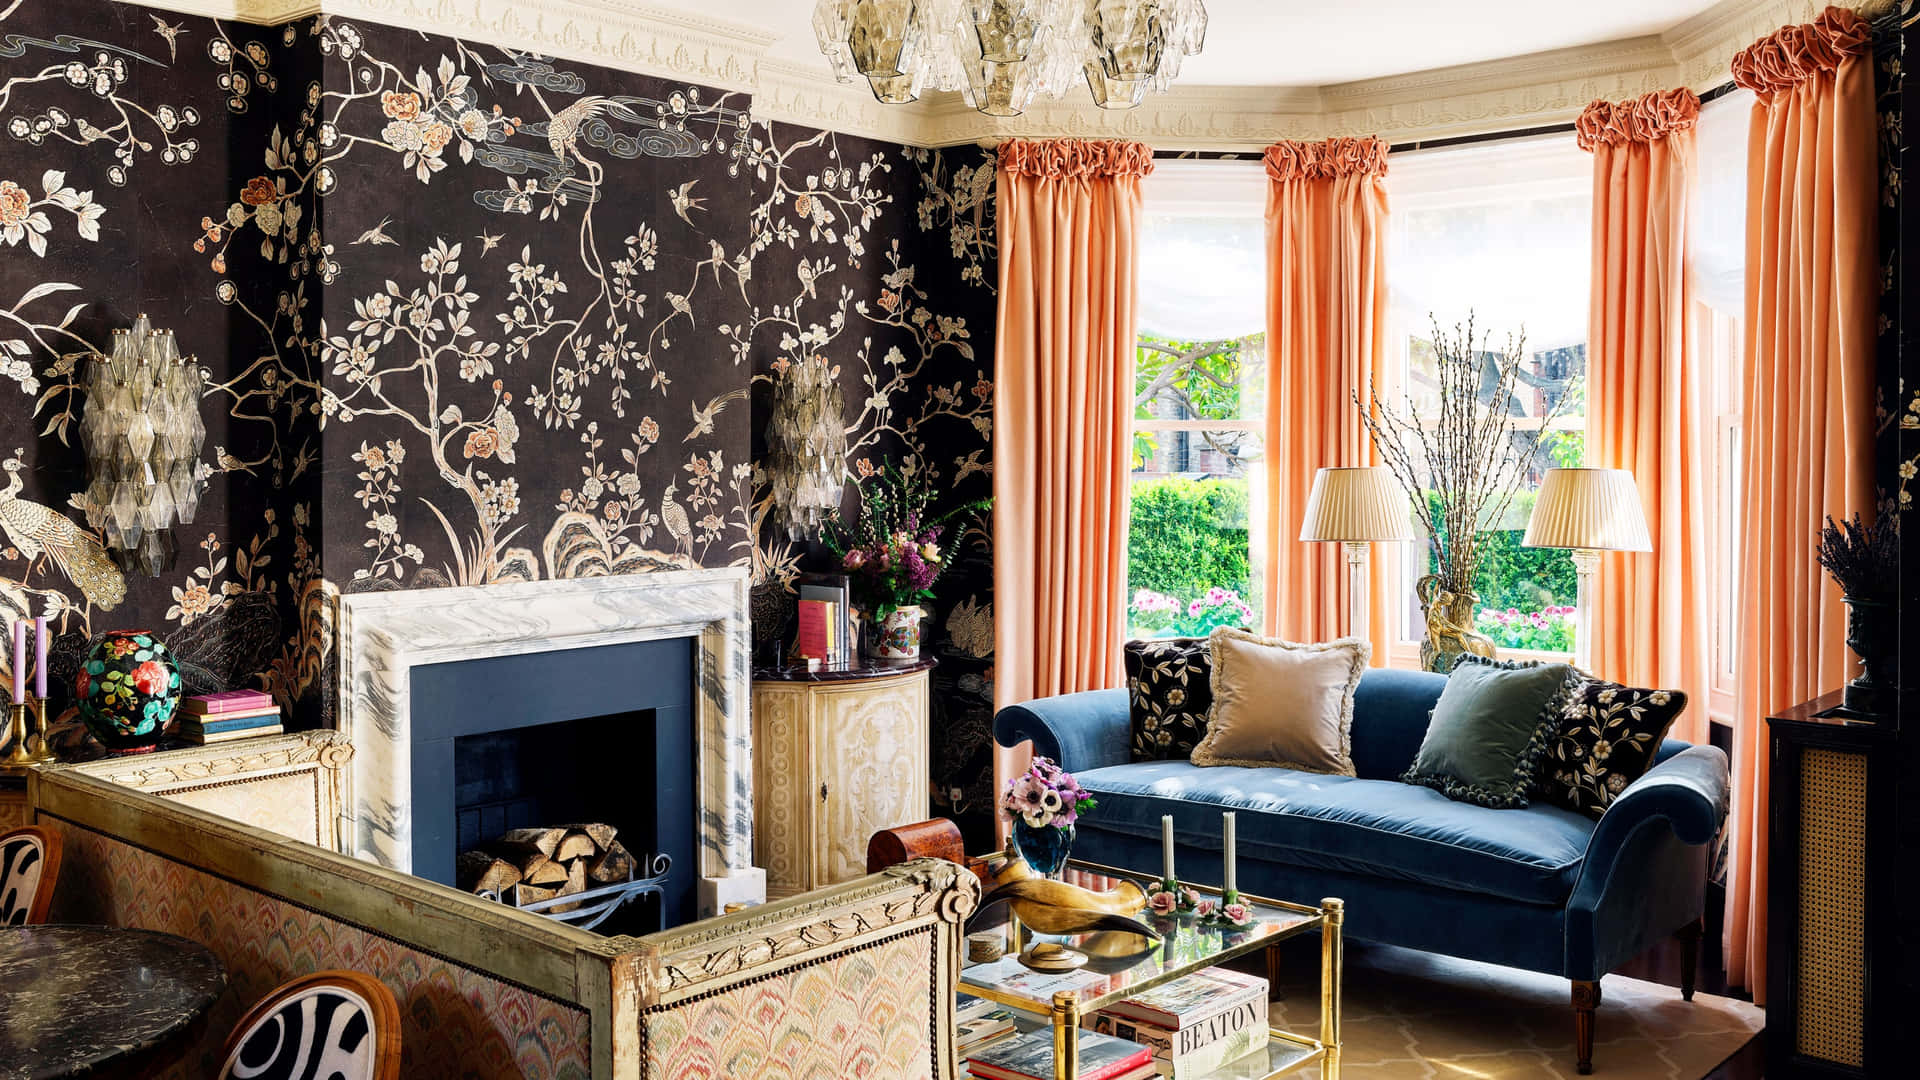 A Living Room With A Fireplace And Floral Wallpaper